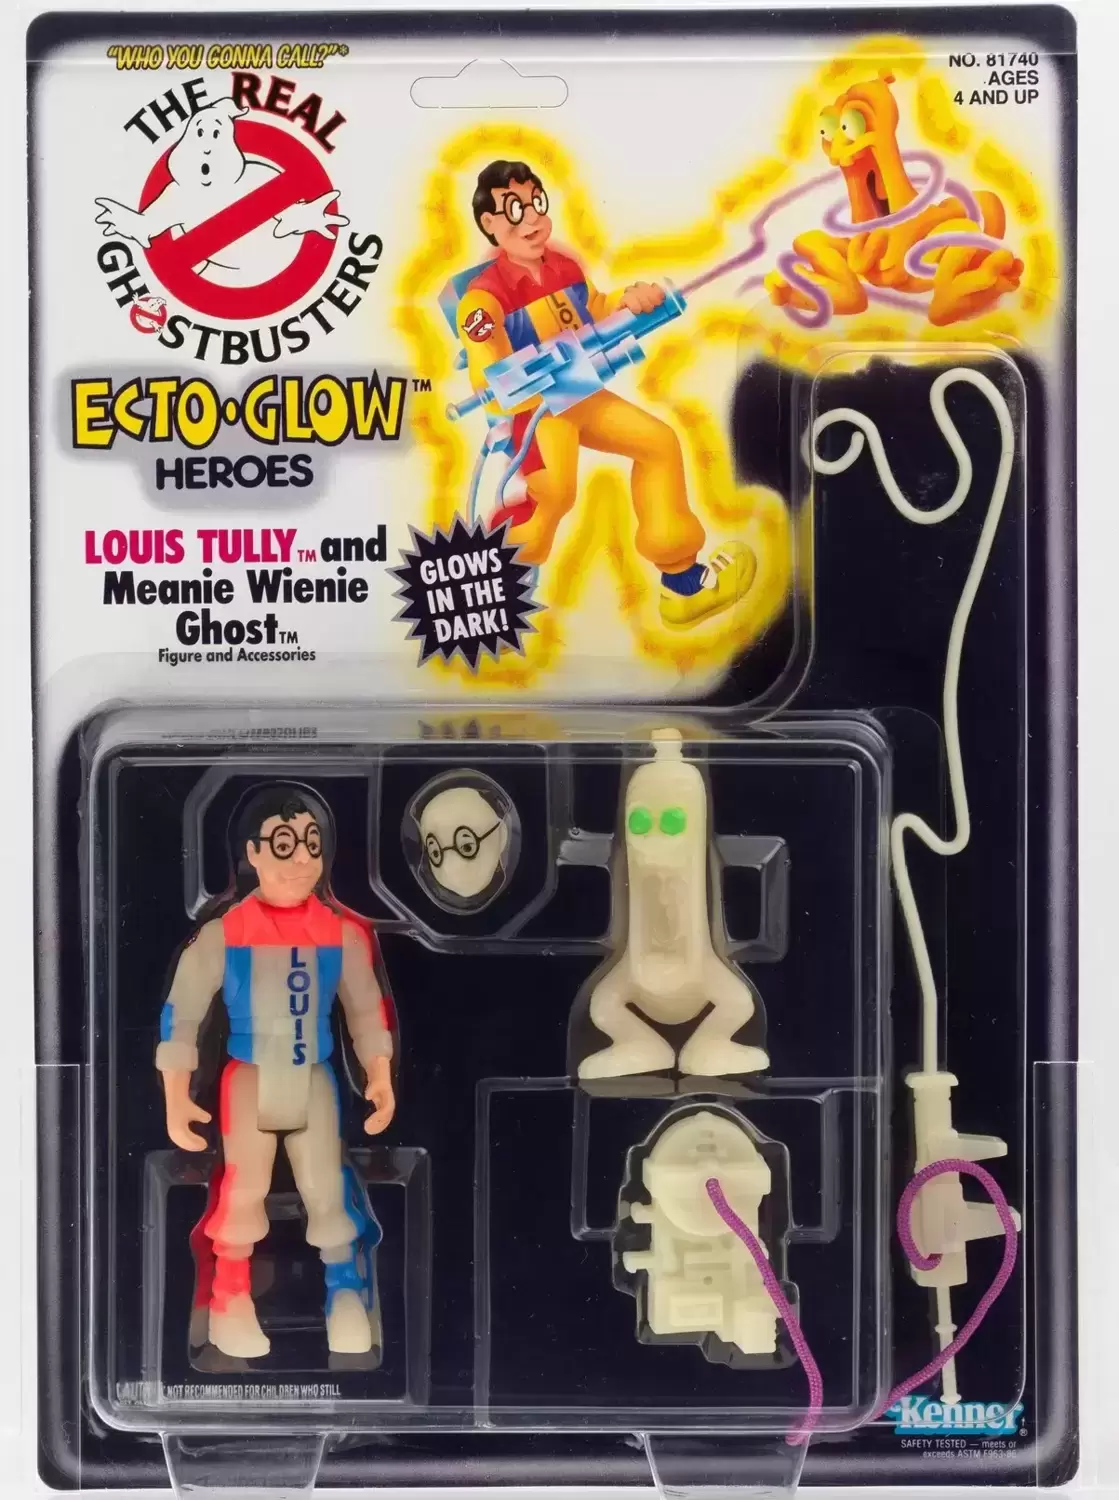 Kenner - The Real Ghostbusters - Louis Tully - Ecto-Glow